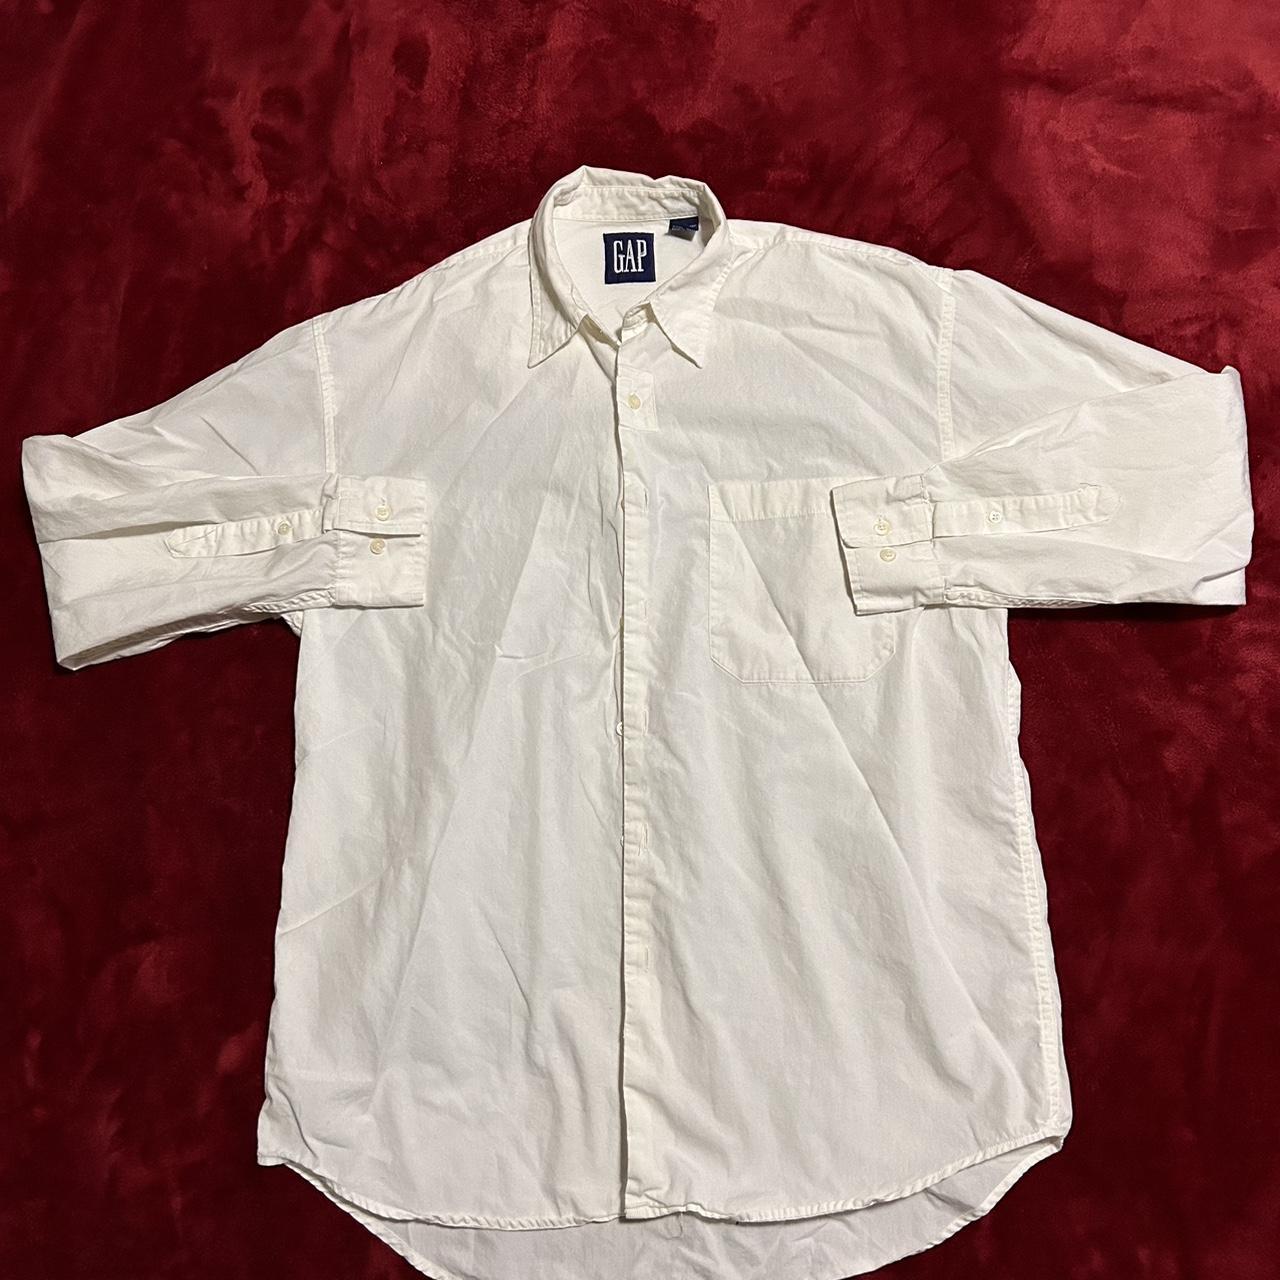 Gap dress shirt in white size M Good fit and no stains - Depop